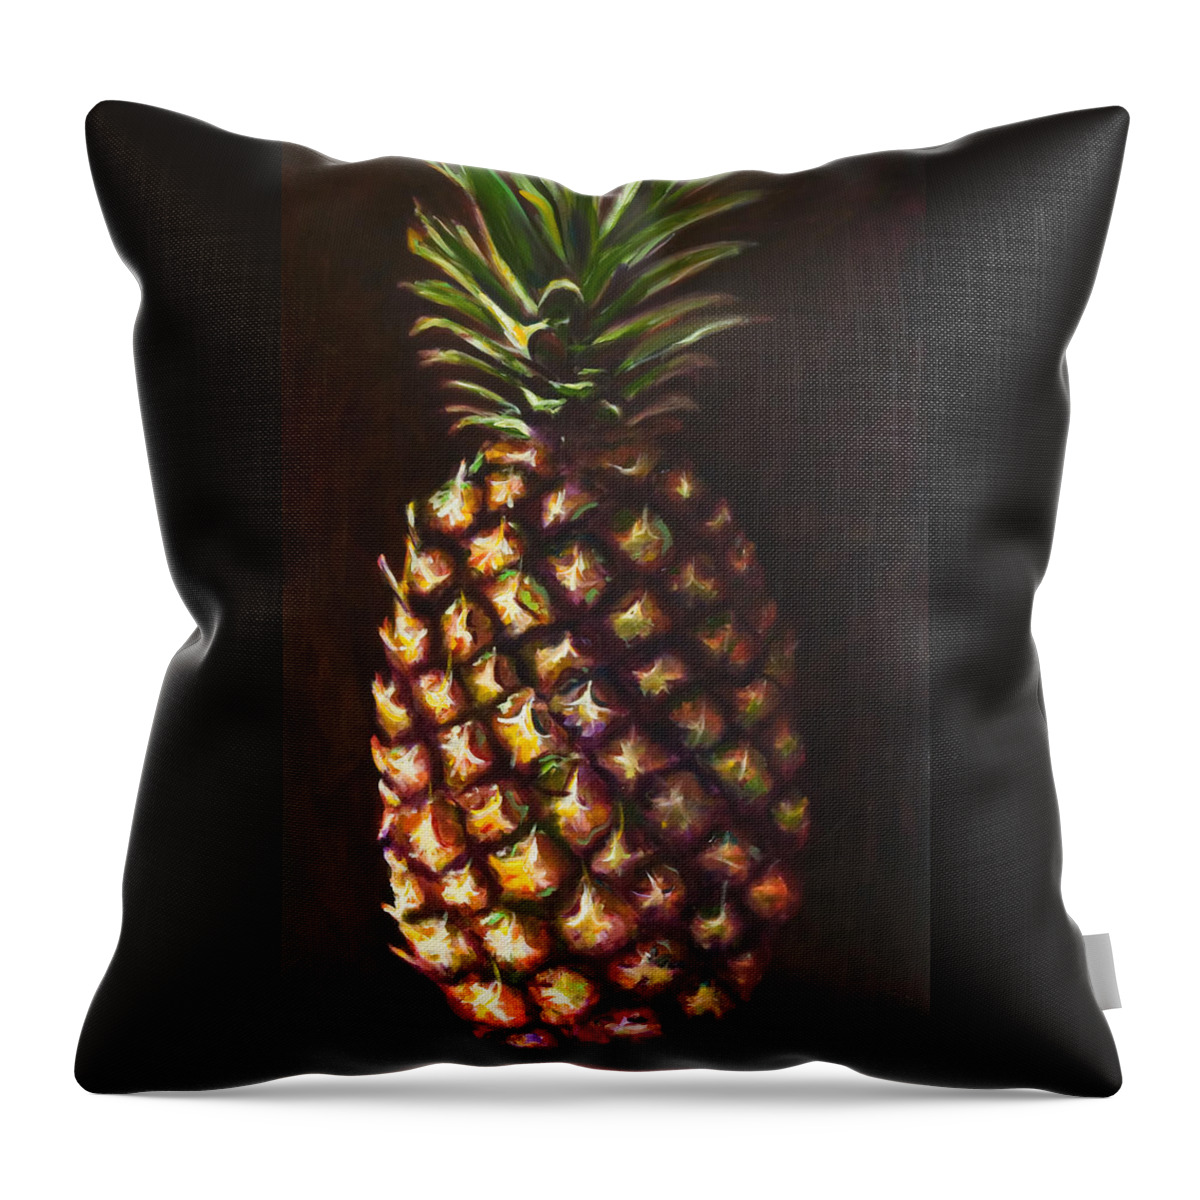 Fruit Throw Pillow featuring the painting Pine Apple by Shannon Grissom